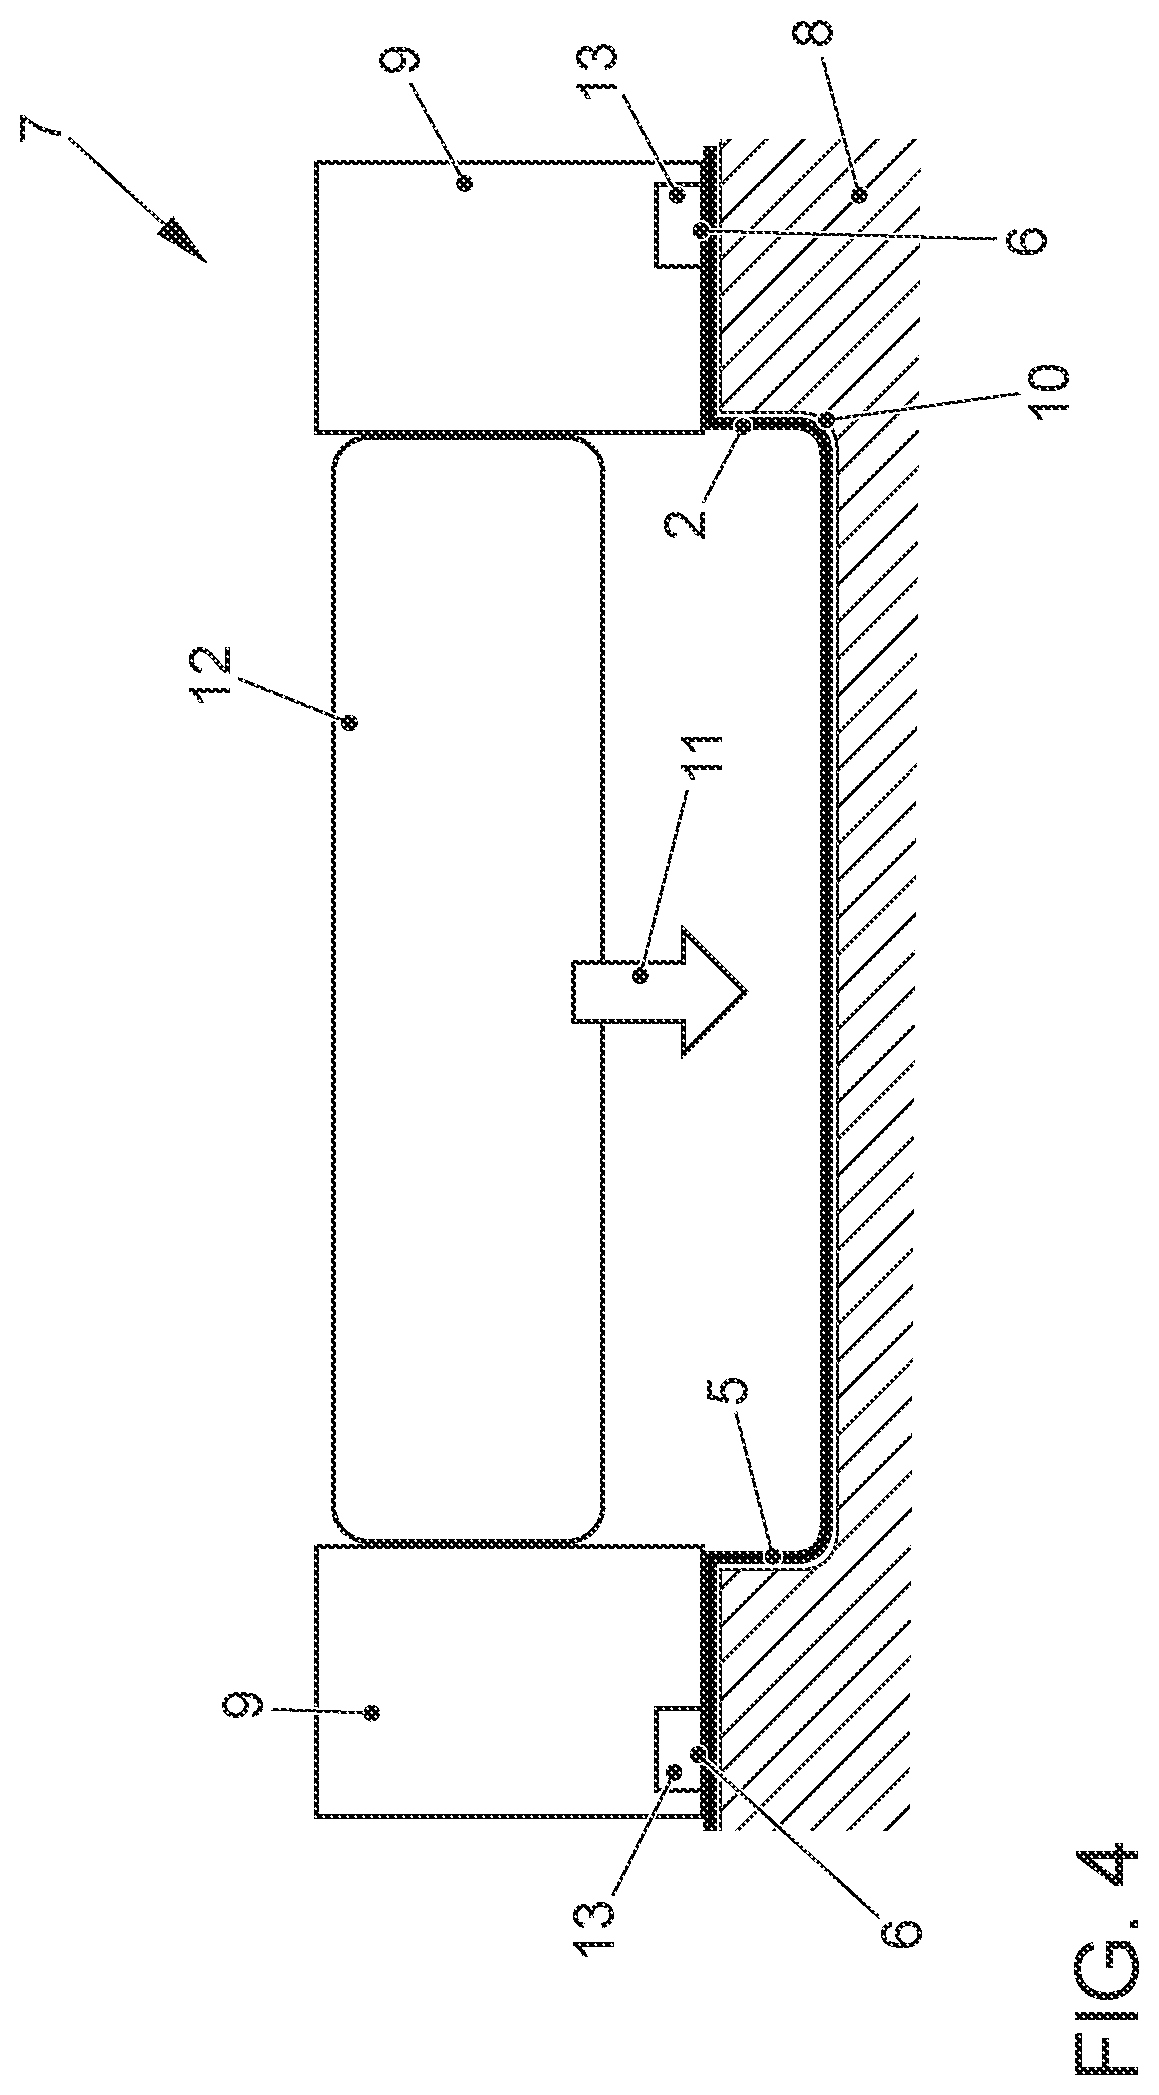 Method and device for connecting composite metal foils for pouch cells with a pre-sealing tape